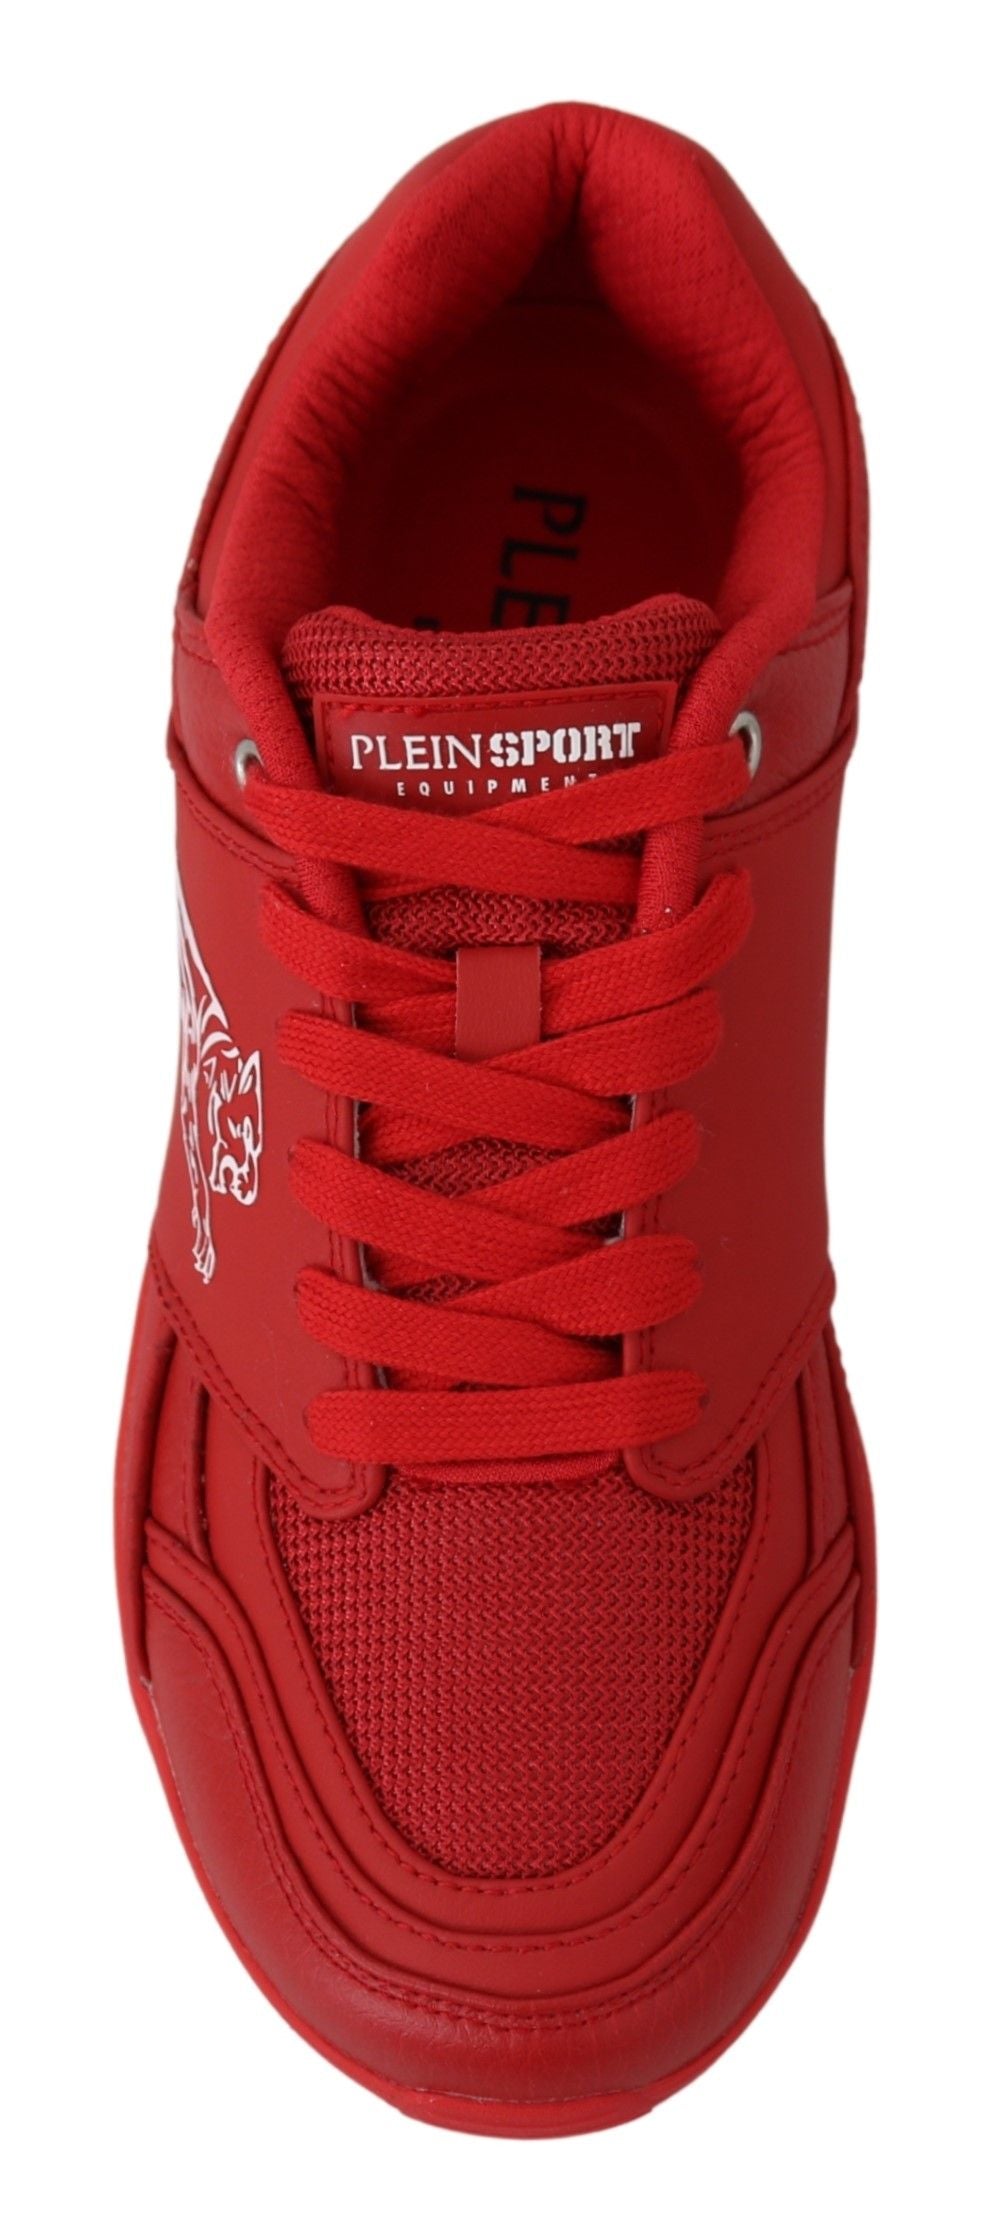 Elevate Your Game with Sleek Red Sneakers